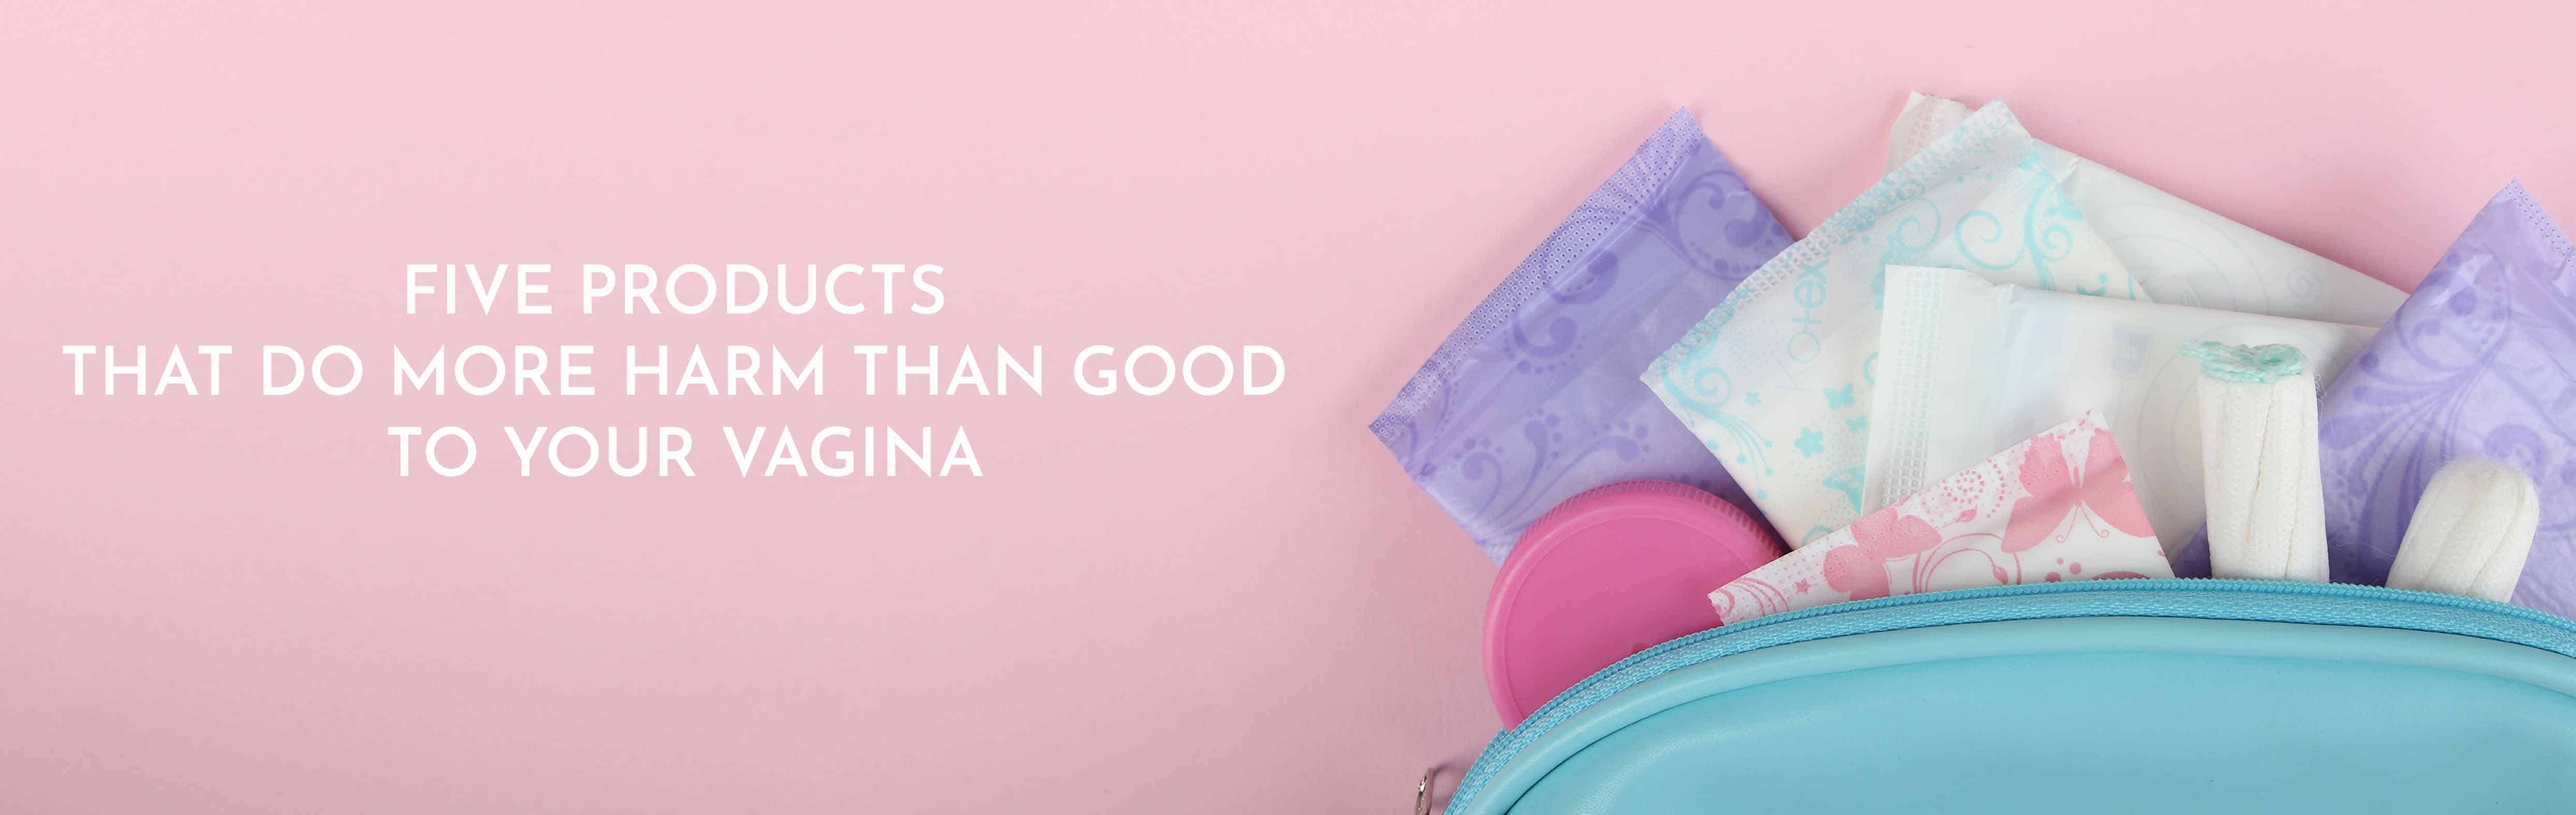 5 Products Do More Harm than Good to Your Vagina